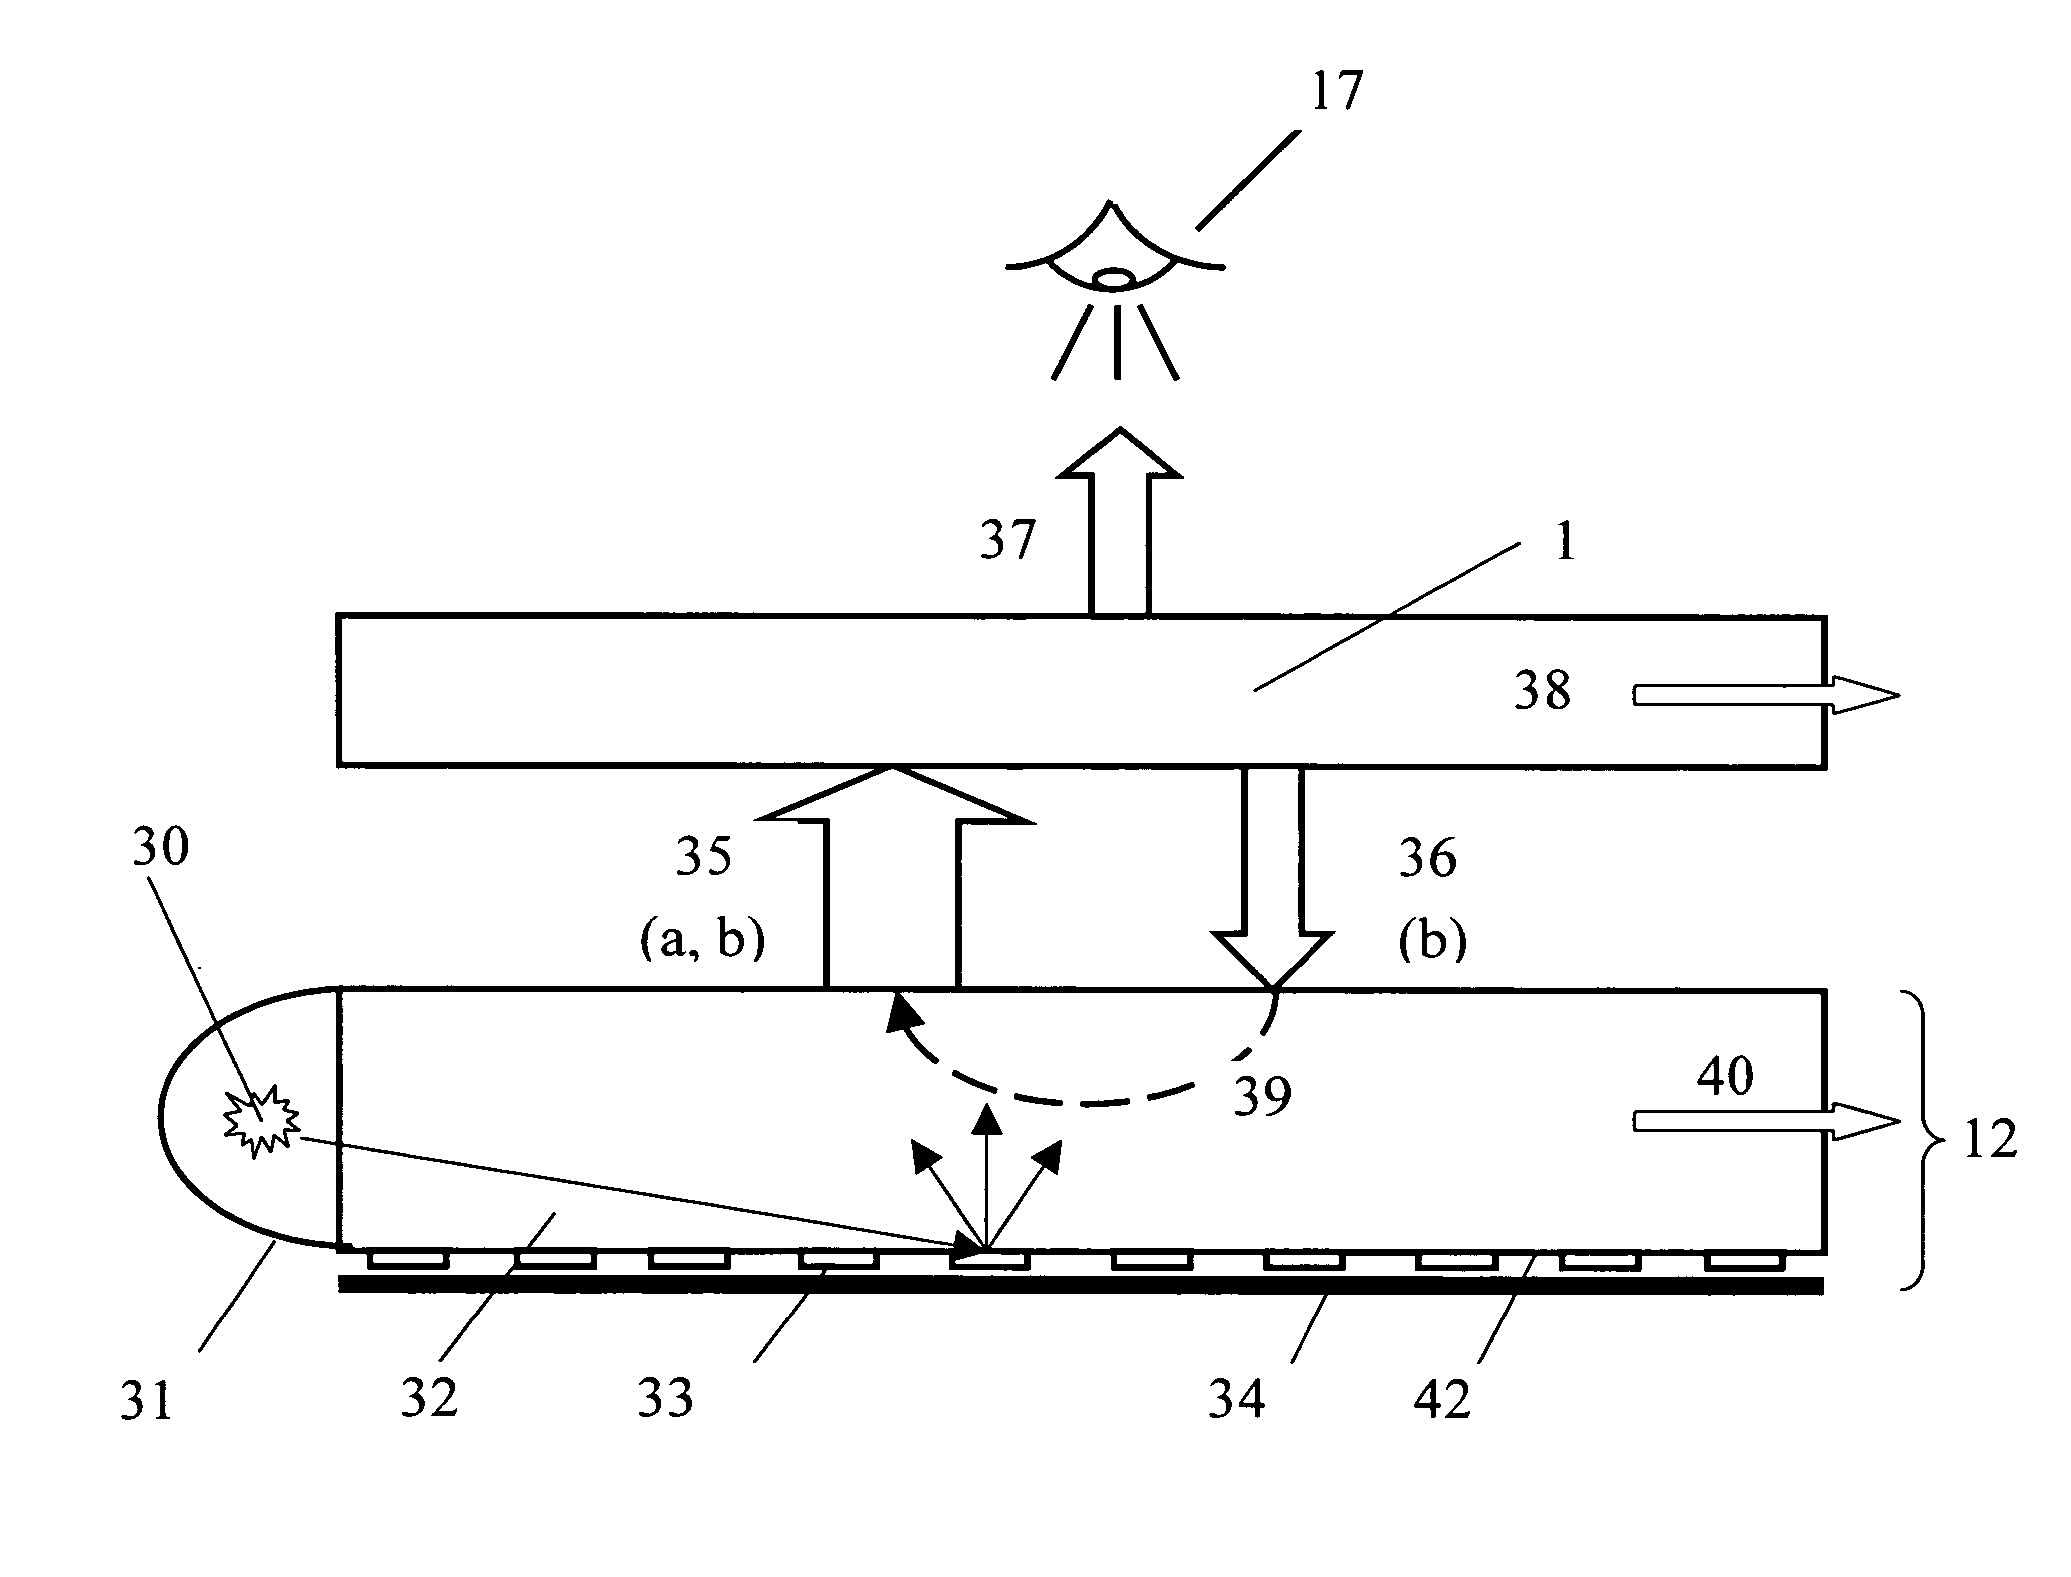 Polarized interference recycling backlight module and liquid crystal display incorporating the same